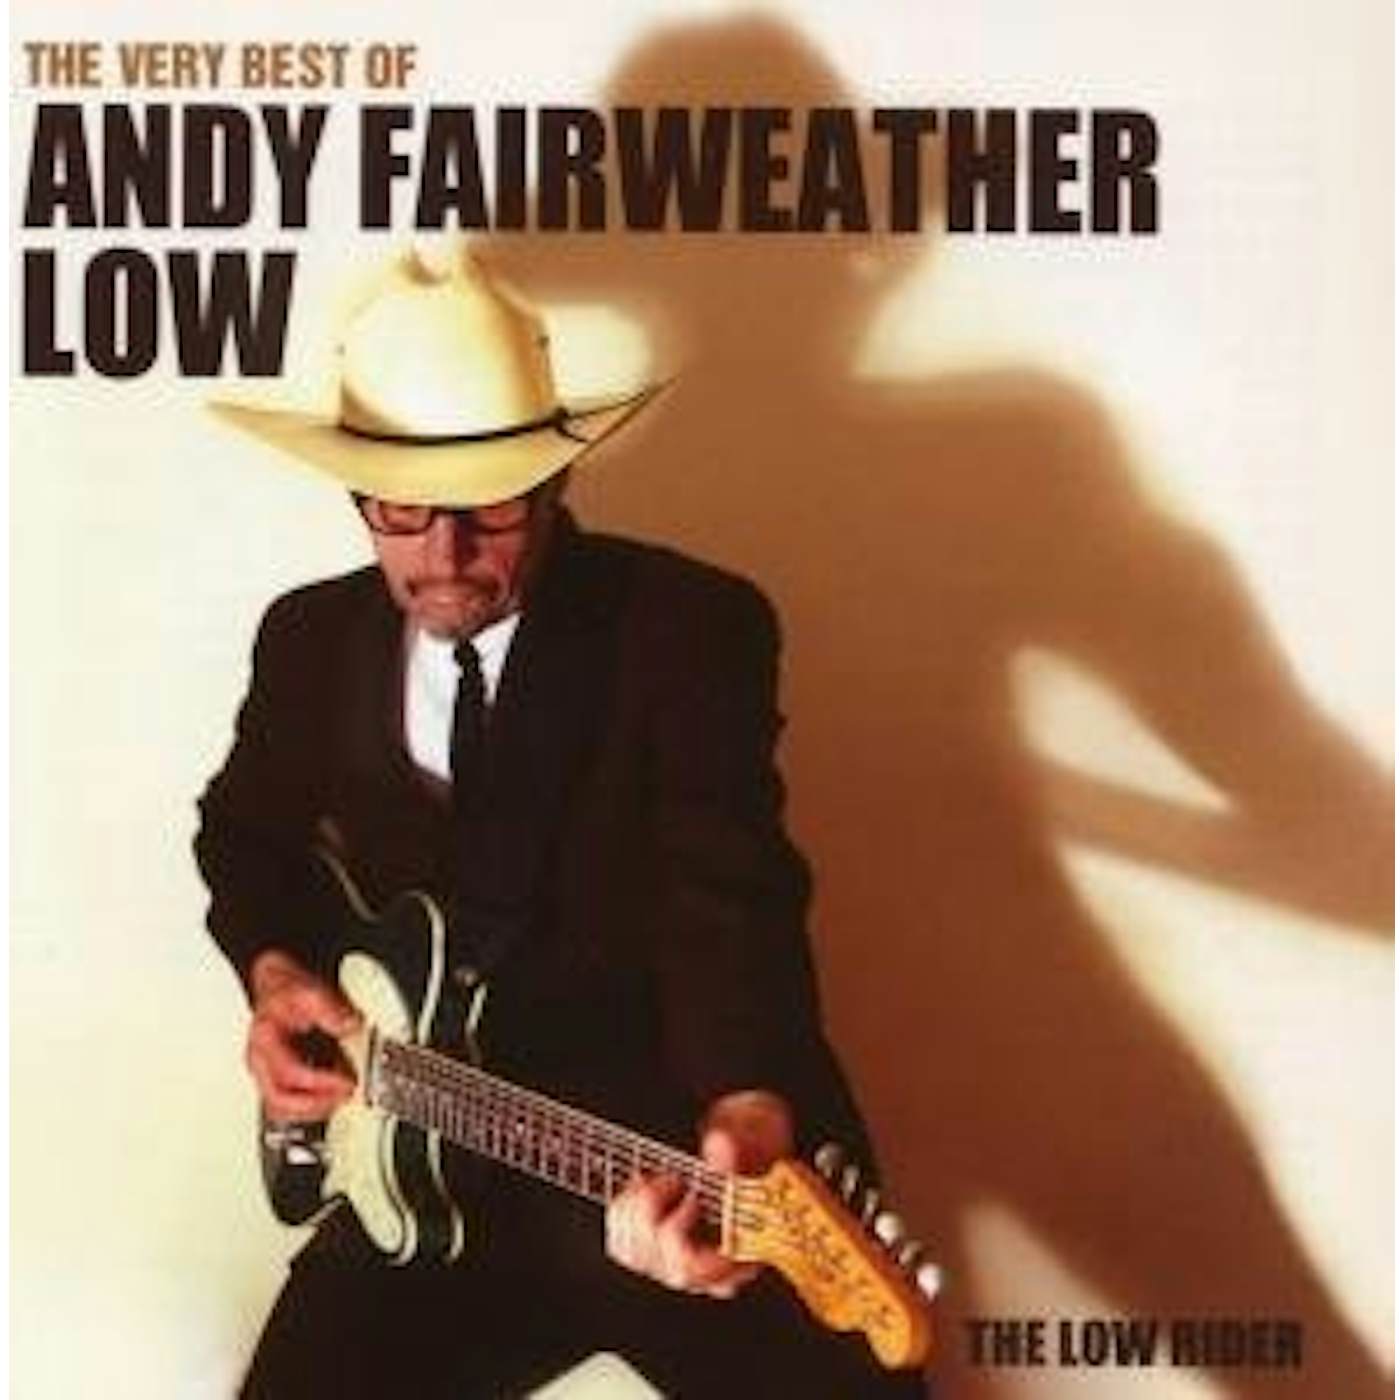 Andy Fairweather Low VERY BEST OF THE LOW RIDER CD